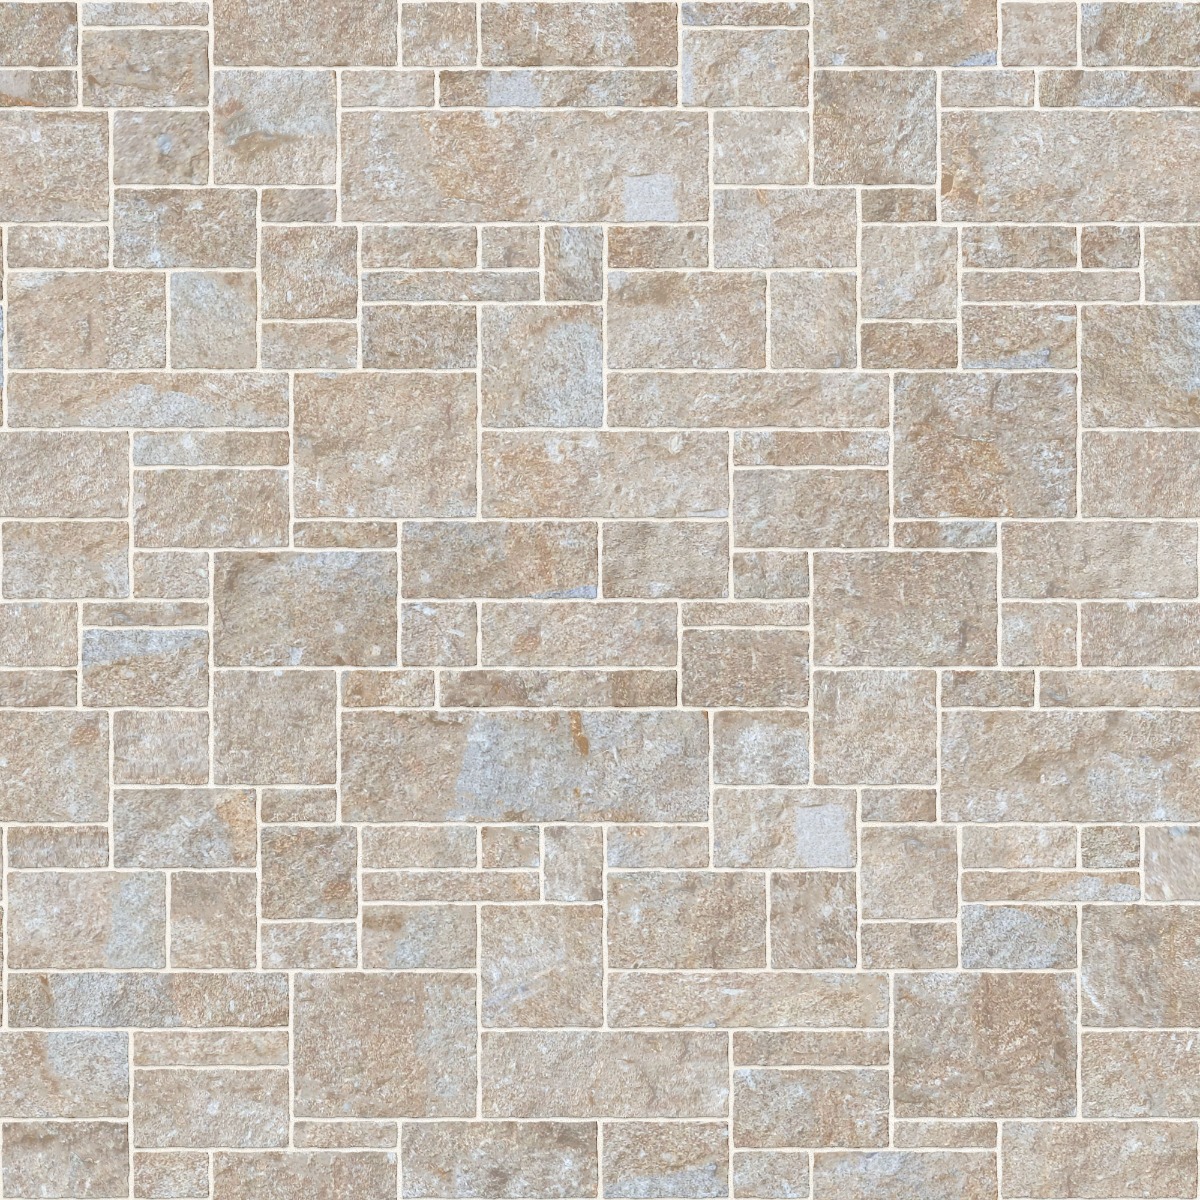 A seamless stone texture with rough limestone blocks arranged in a Uncoursed Ashlar pattern